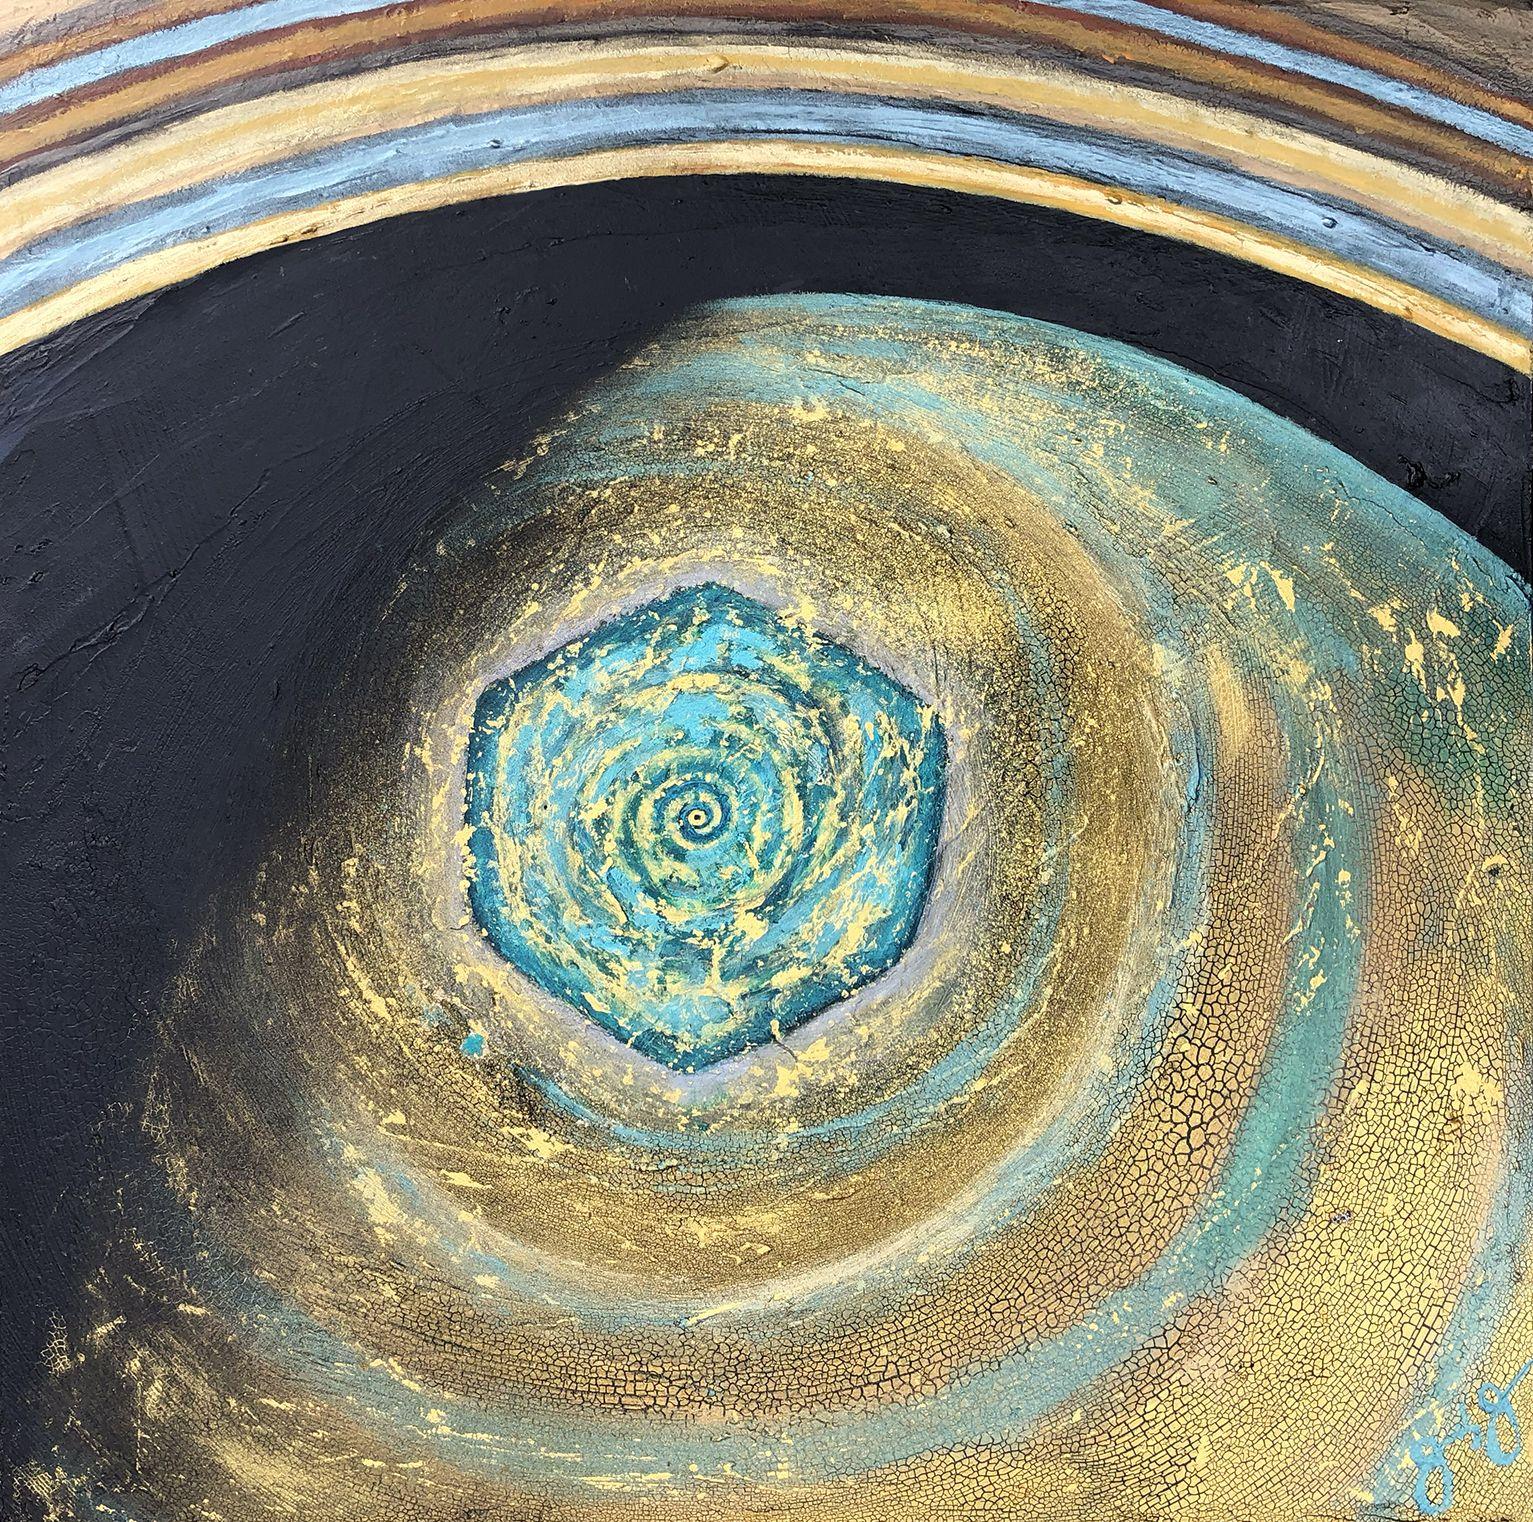 aeon 7: saturn has a hex, Mixed Media on Canvas - Mixed Media Art by Jason Lincoln Jeffers